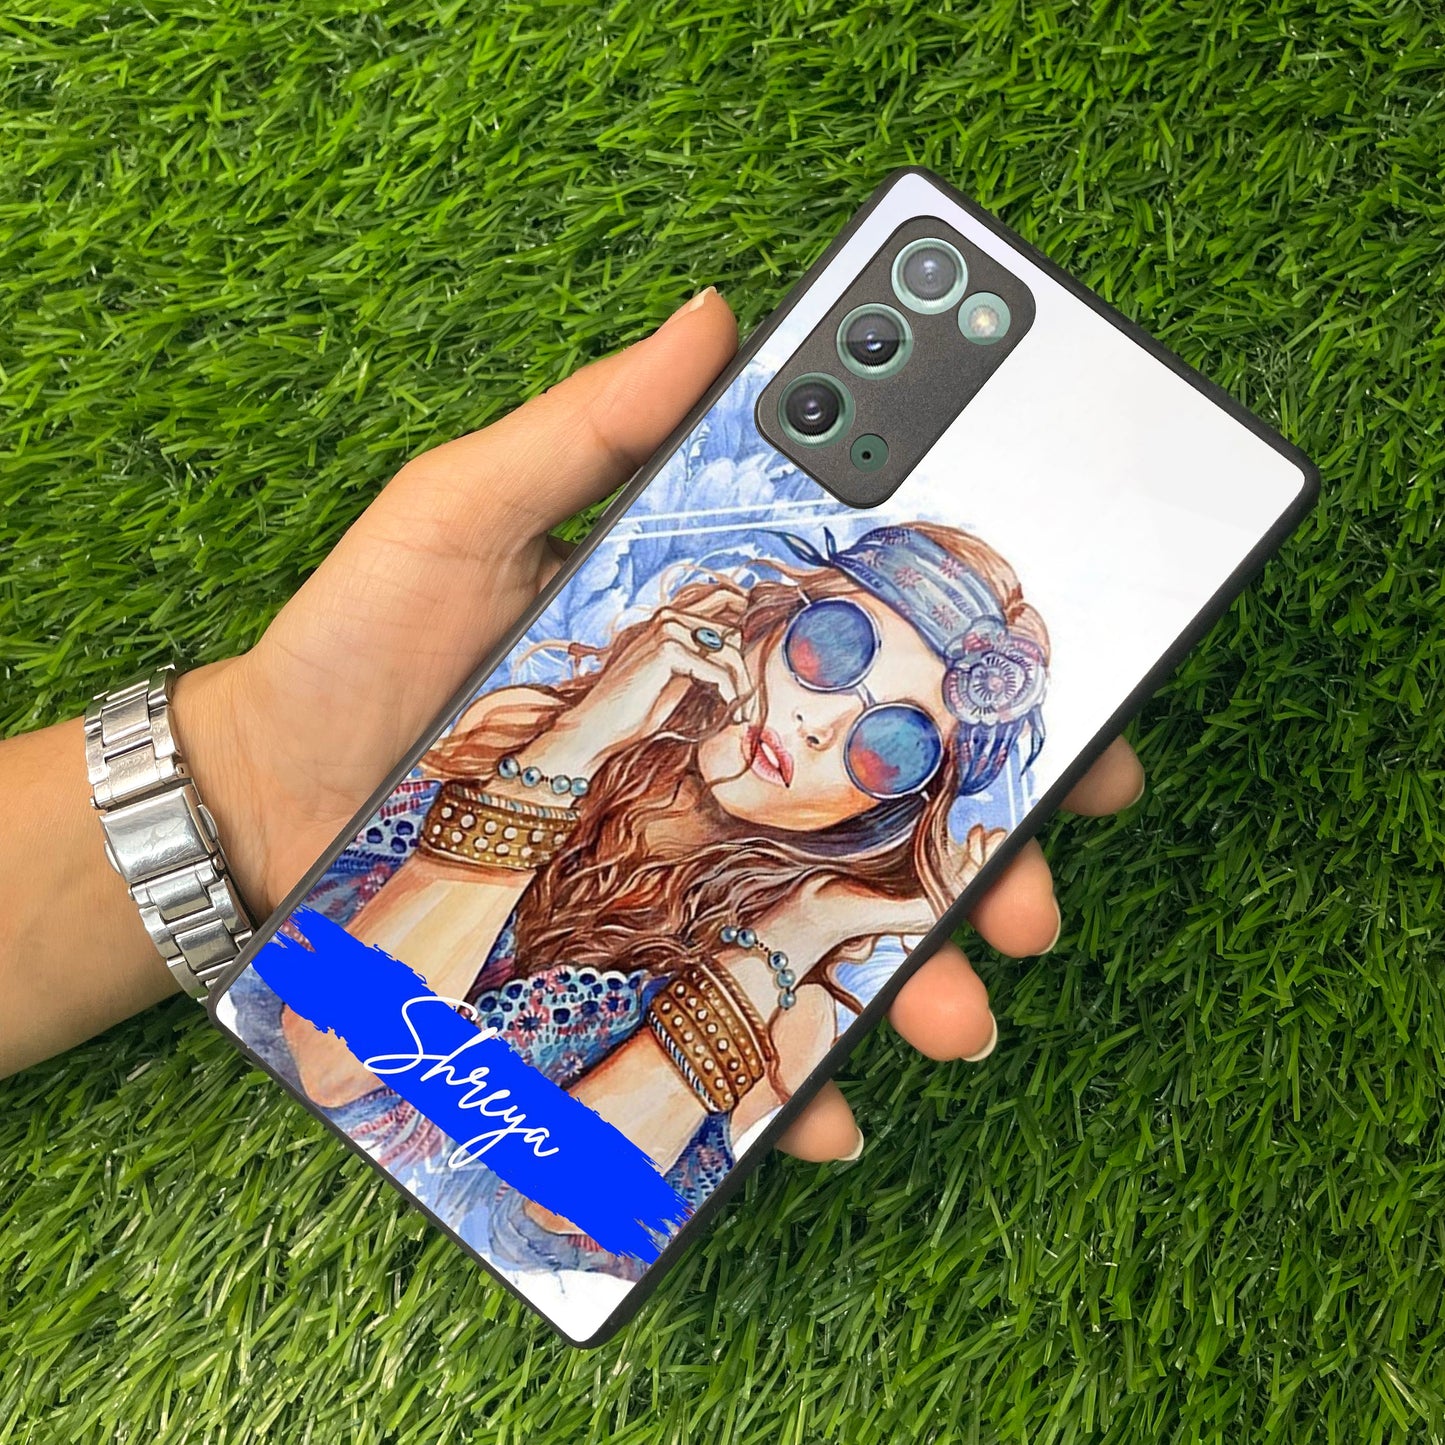 Bindass Babe Customize Glass Case Cover For Samsung